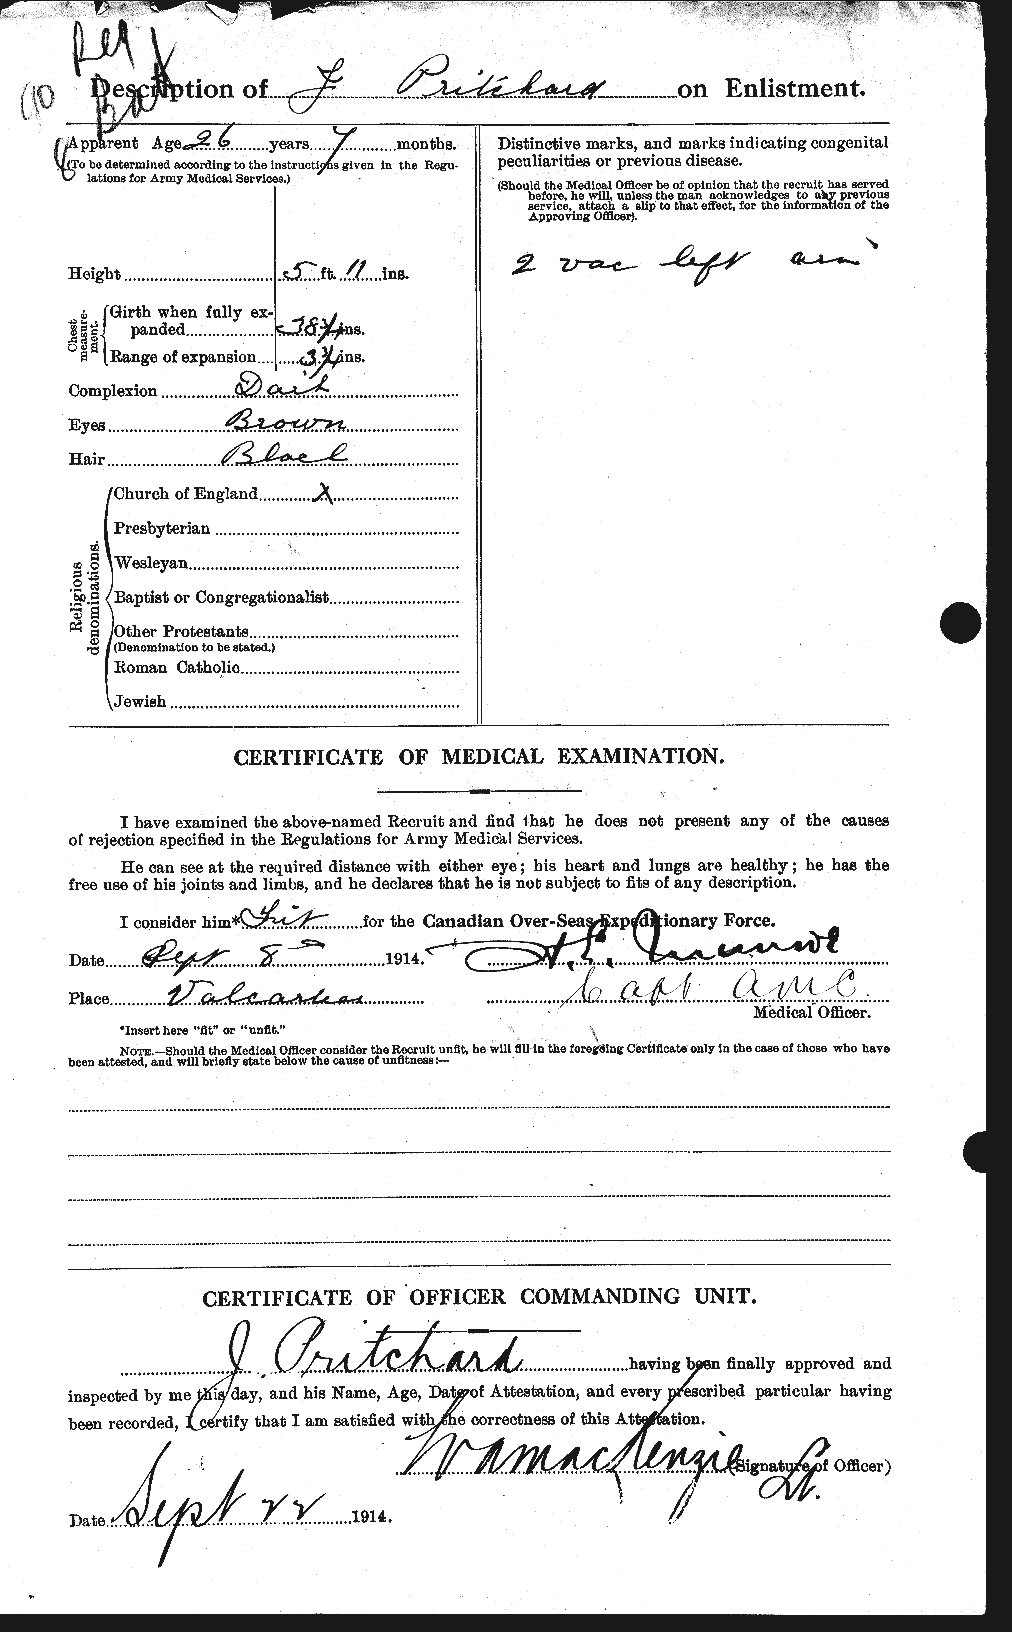 Personnel Records of the First World War - CEF 588564b